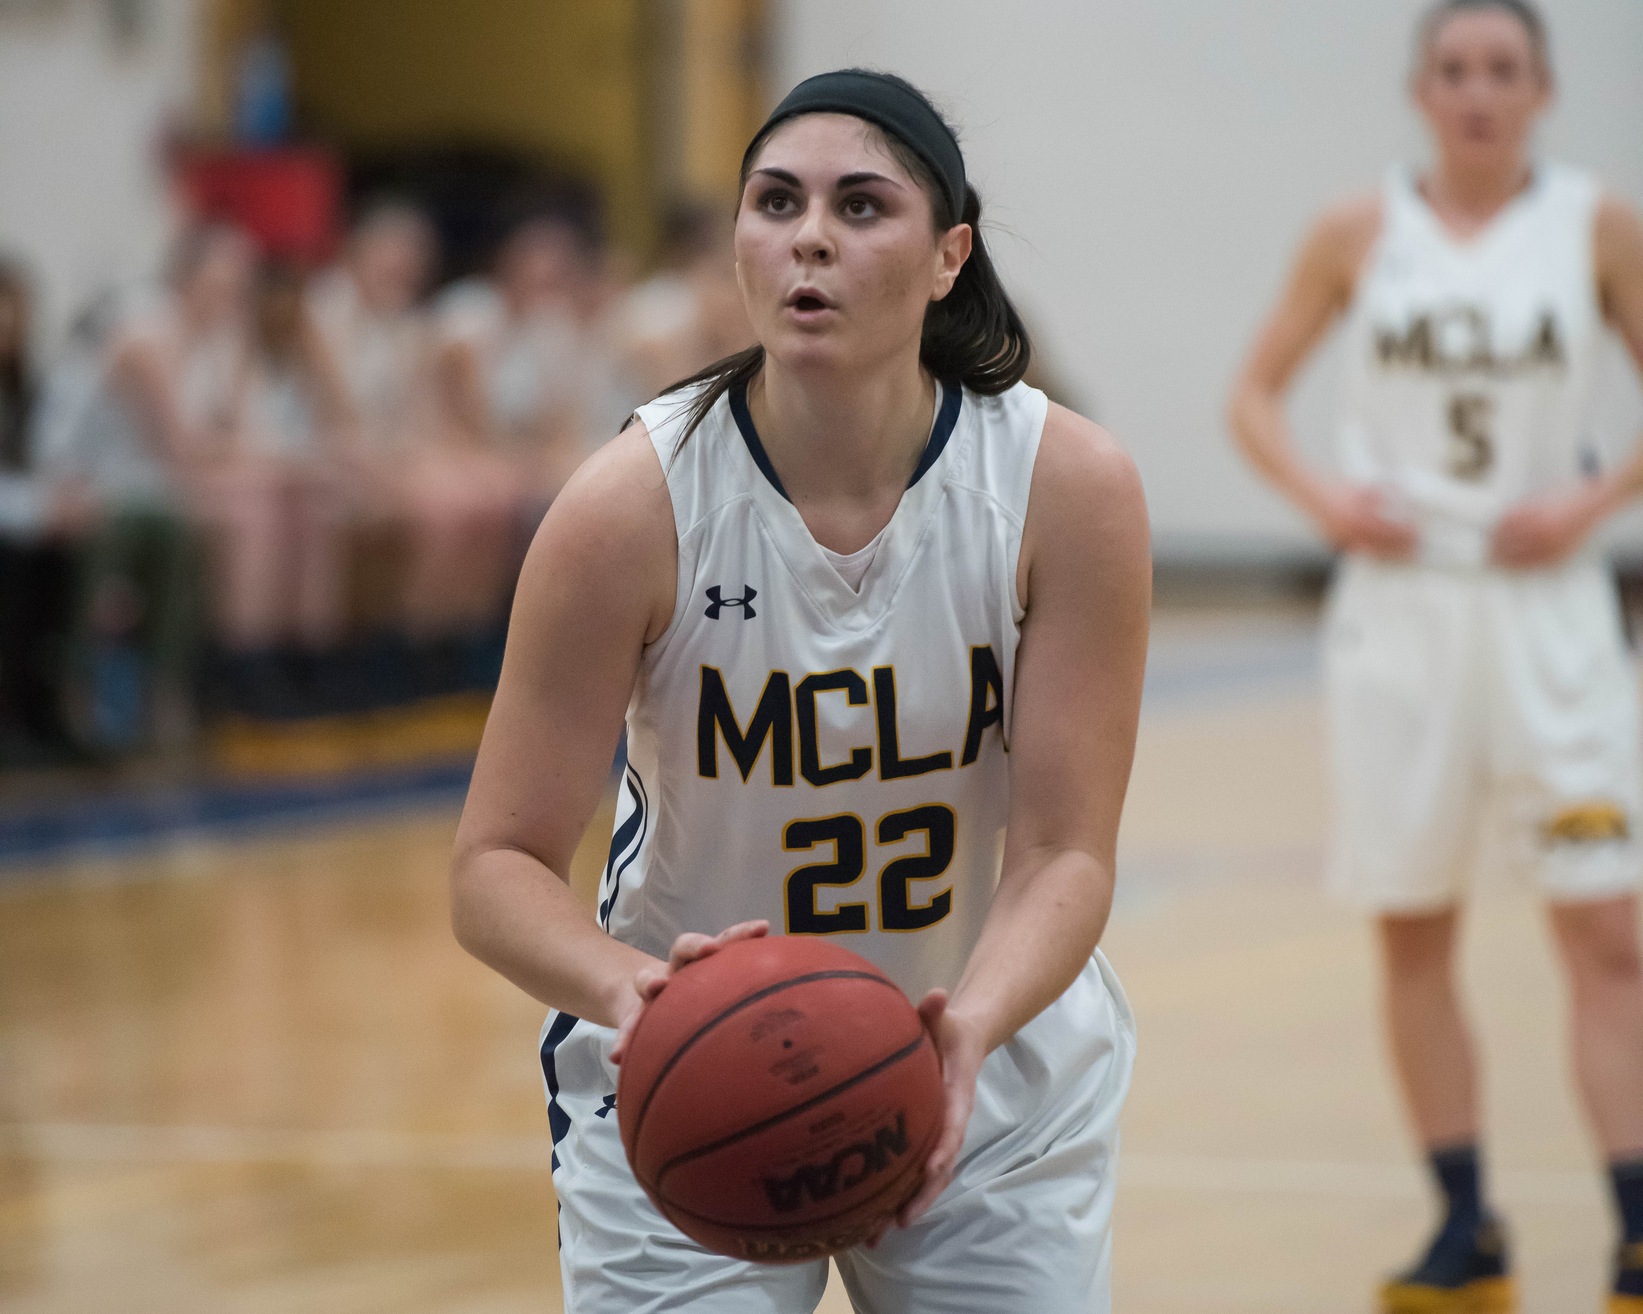 Sixth seeded Trailblazers travel to face third seeded Lancers in MASCAC Quarterfinals